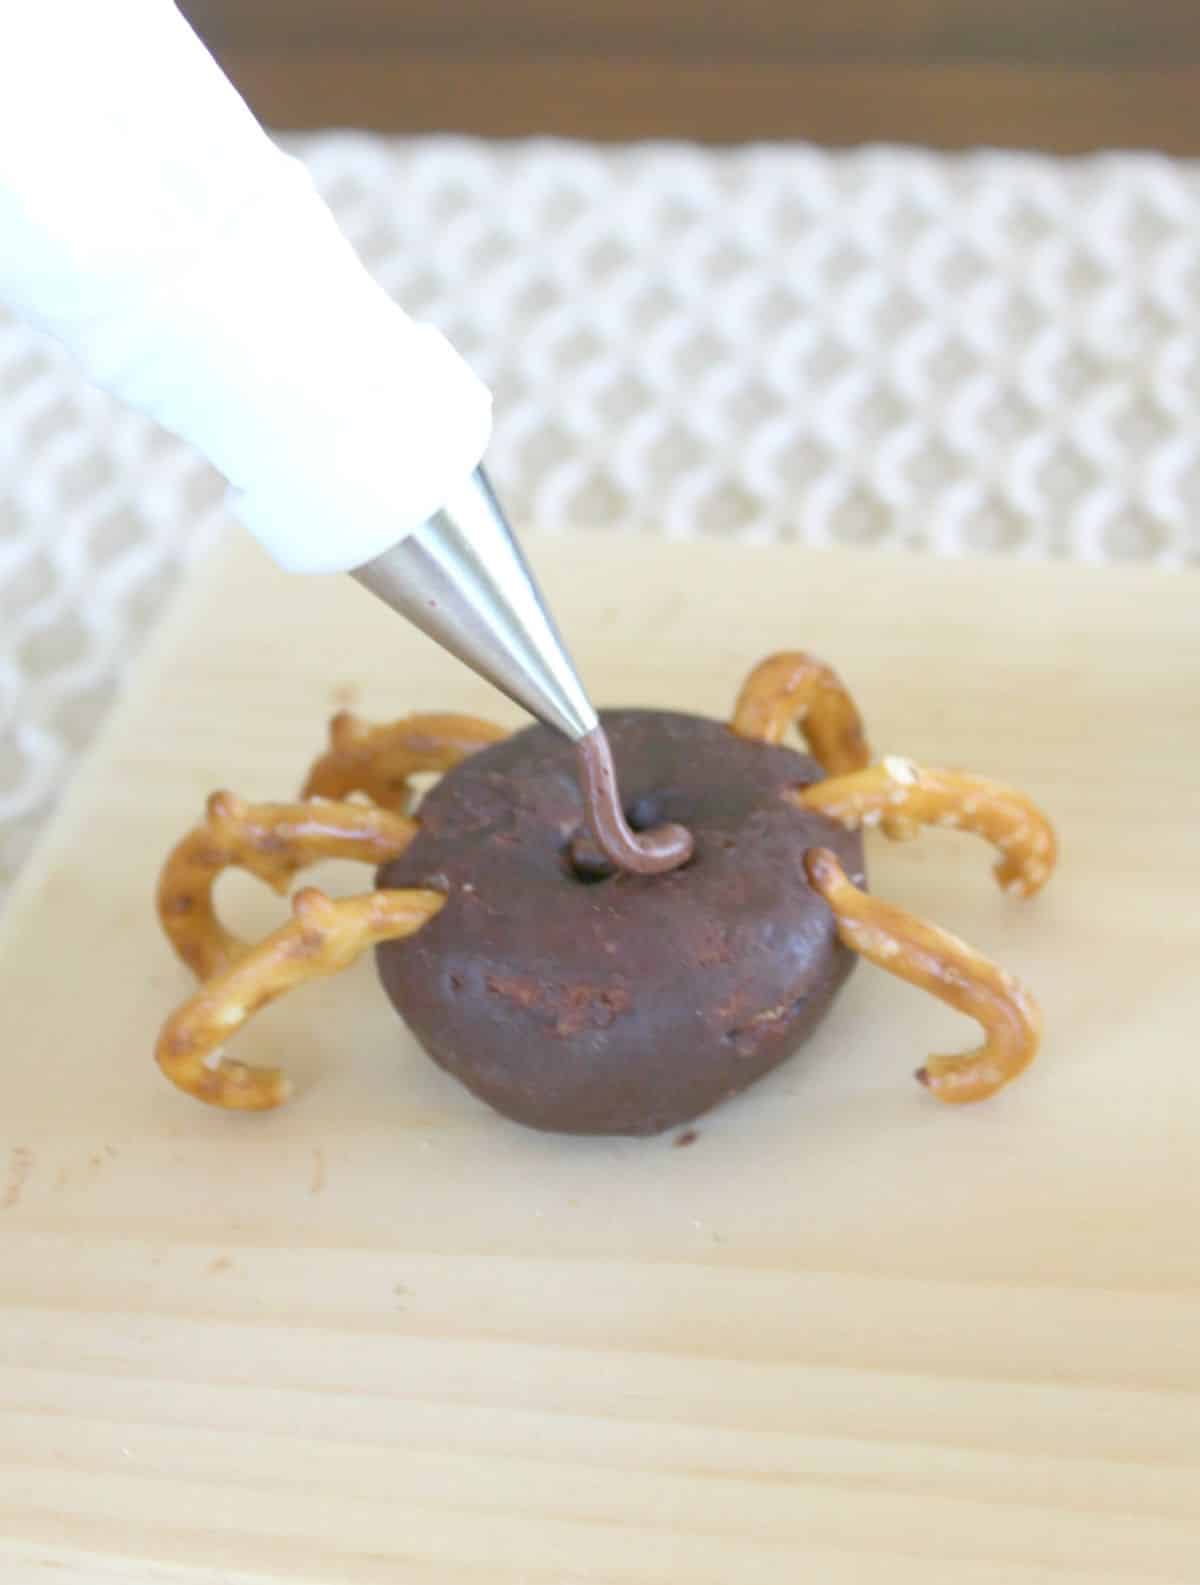 A person is putting chocolate on a mini donut.